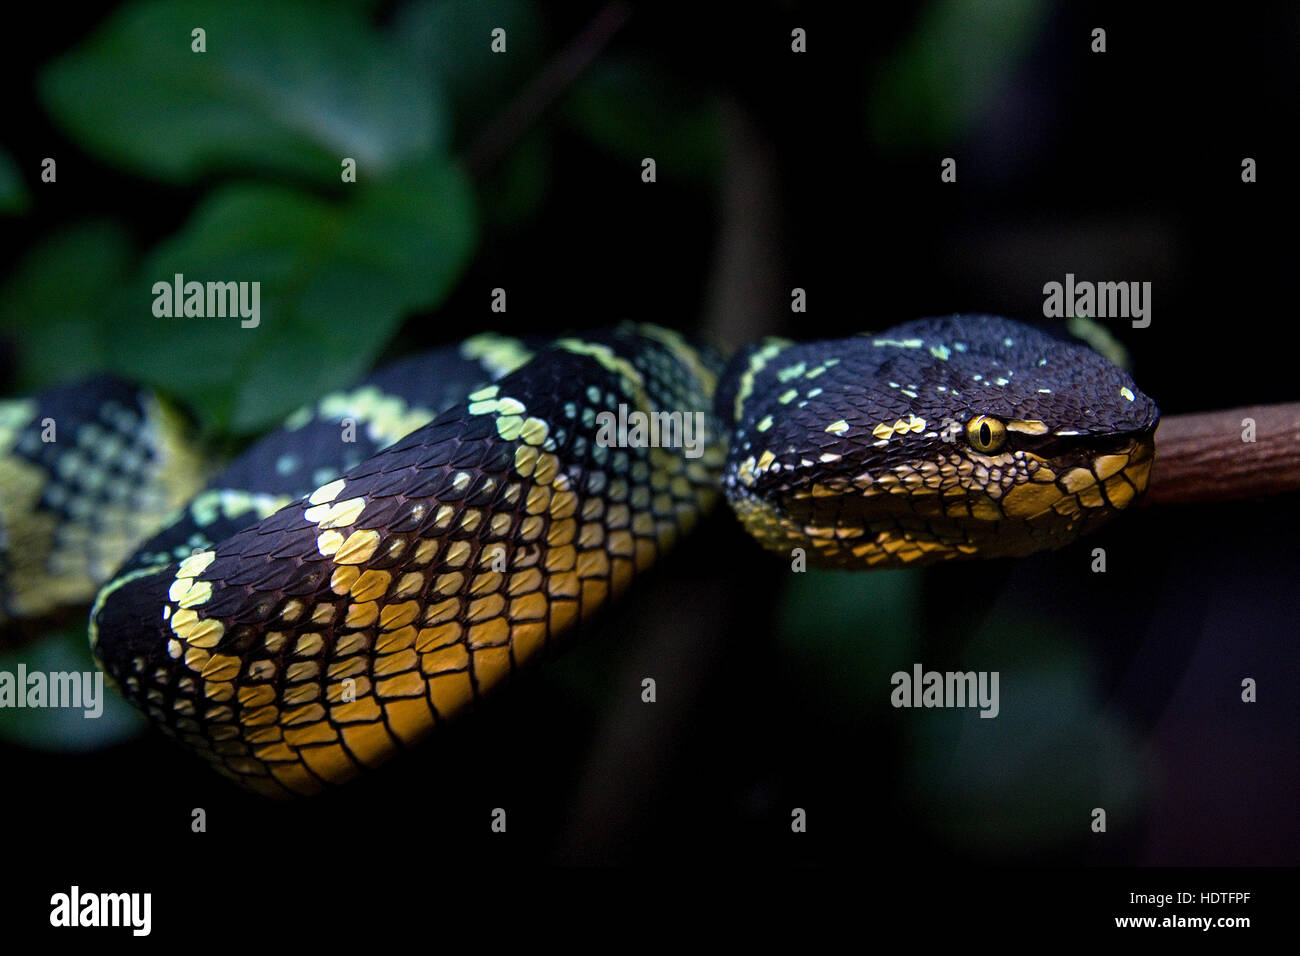 Close up of a beautiful snake on a tree branch with a blurry background of green leaves Stock Photo